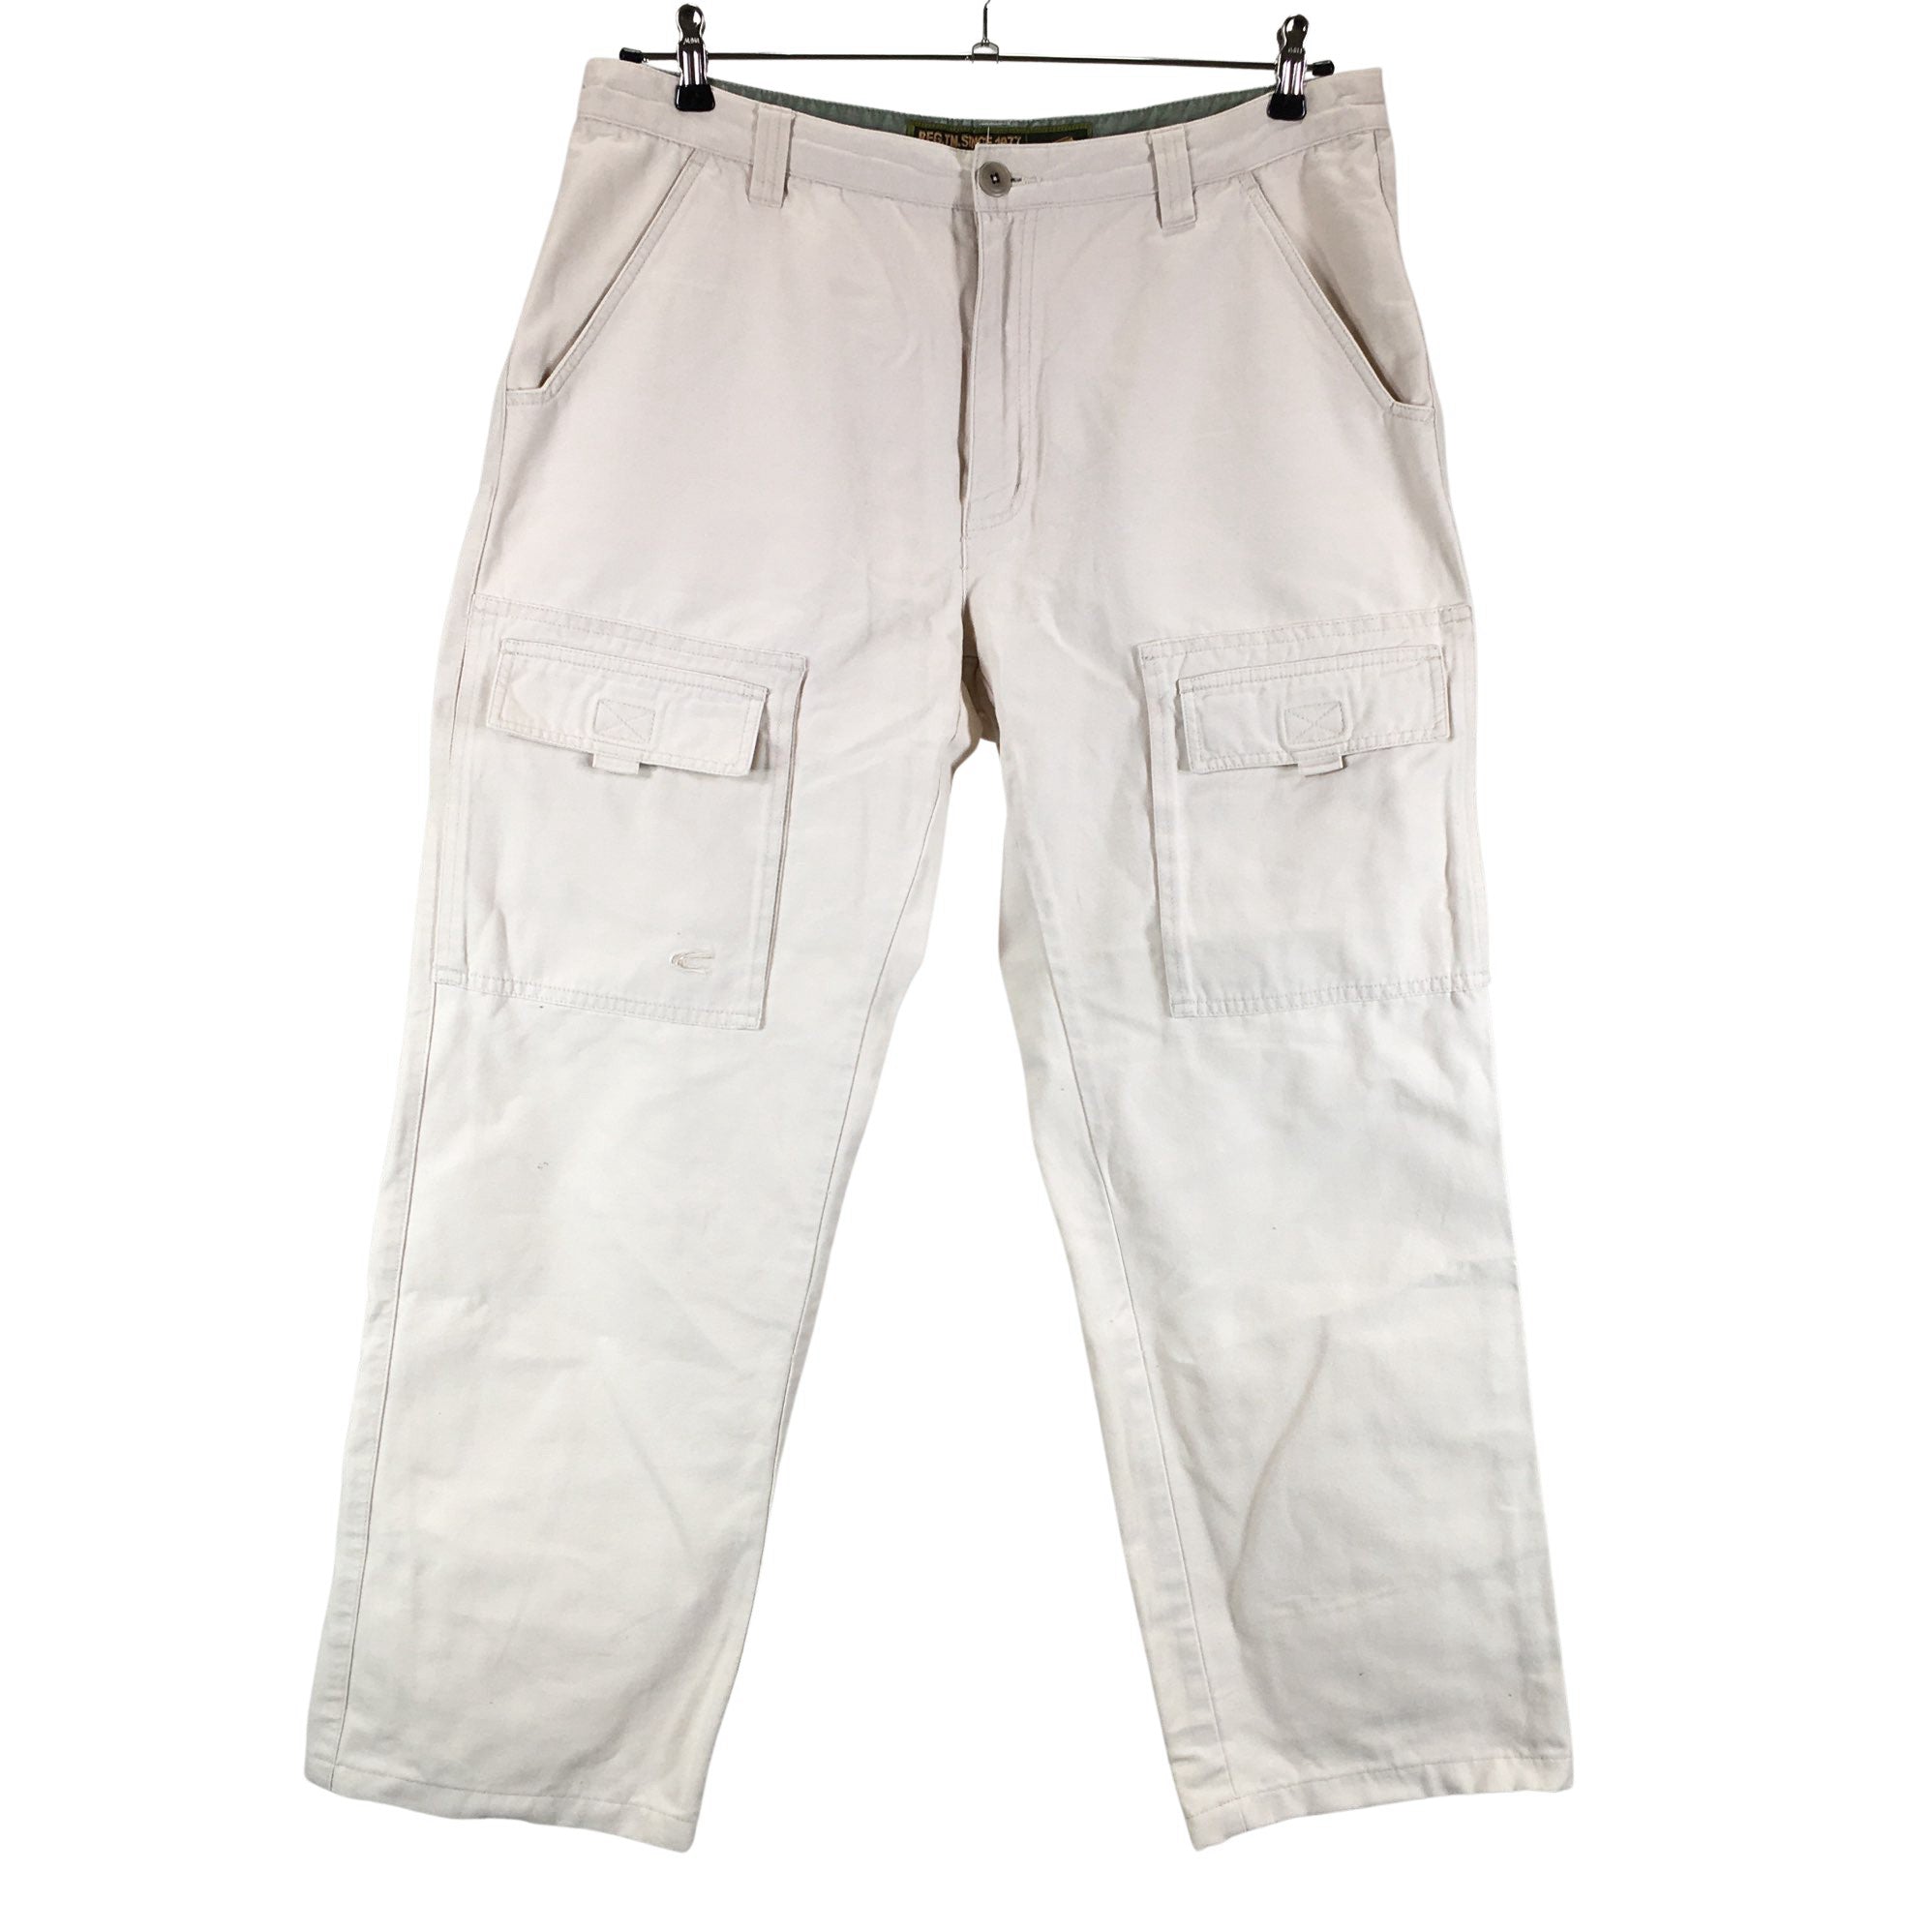 Mens trousers  Camel Active  Dressyou